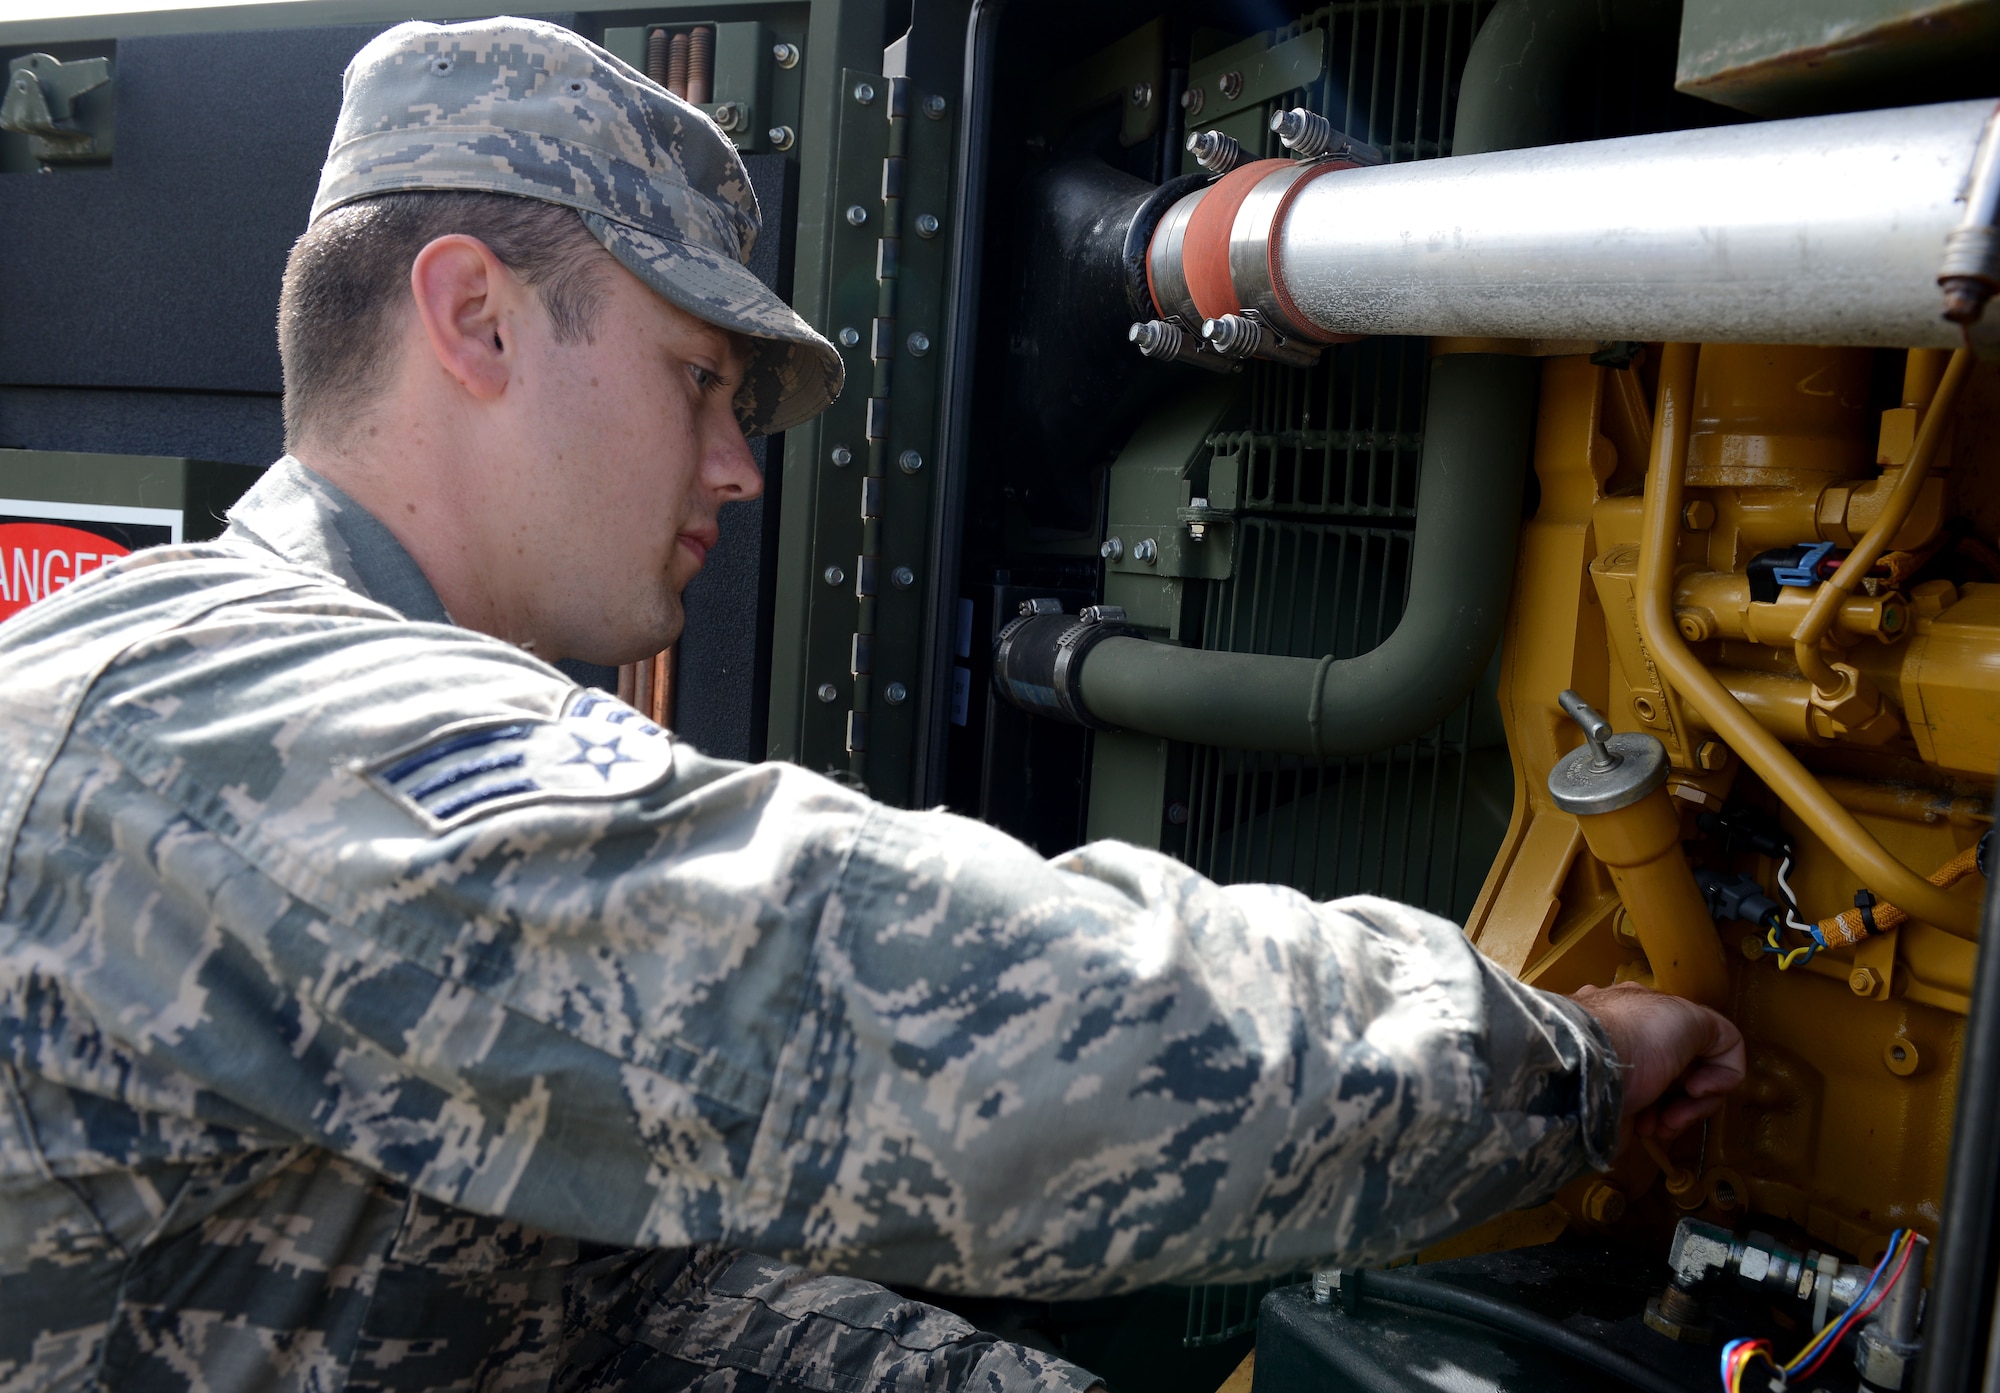 Senior Airman Michael Eyres, 644th Combat Communications Squadron power production technician, performs an inspection on a generator responsible for providing air conditioning to tents during exercise Cope North 16 Feb. 16, 2016, at Andersen Air Force Base, Guam. The 644th CBCS played a huge role in providing all the necessary communication equipment and tents for Air Force and partner nations’ mobility assets during a humanitarian assistance and disaster relief exercise. (U.S. Air Force photo/Airman 1st Class Arielle Vasquez)